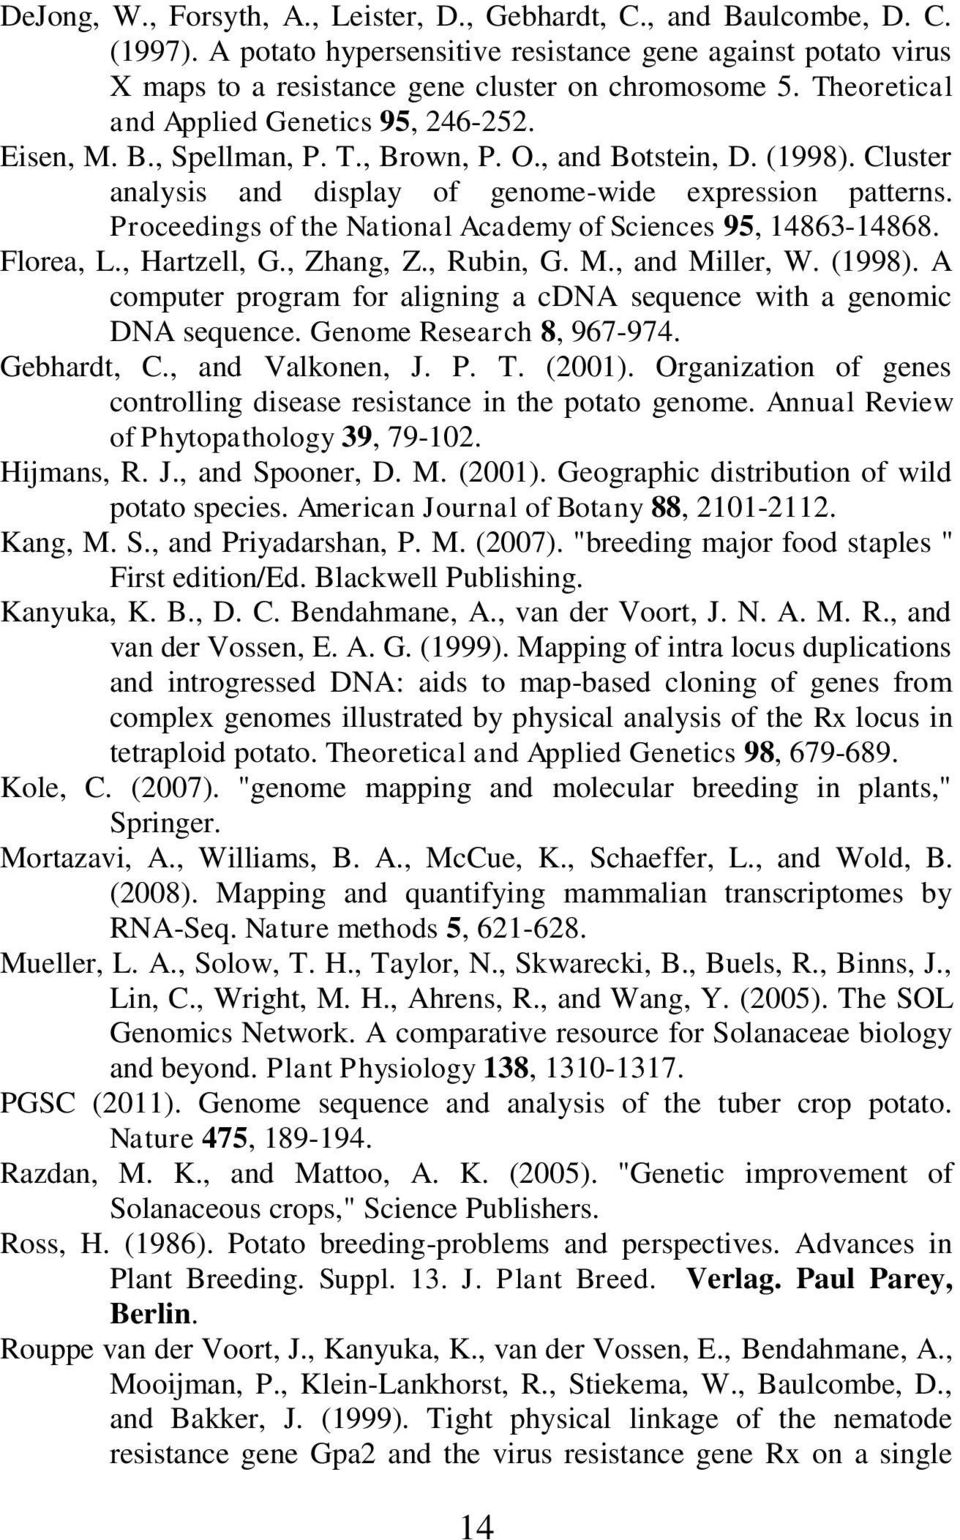 Proceedings of the National Academy of Sciences 95, 14863-14868. Florea, L., Hartzell, G., Zhang, Z., Rubin, G. M., and Miller, W. (1998).